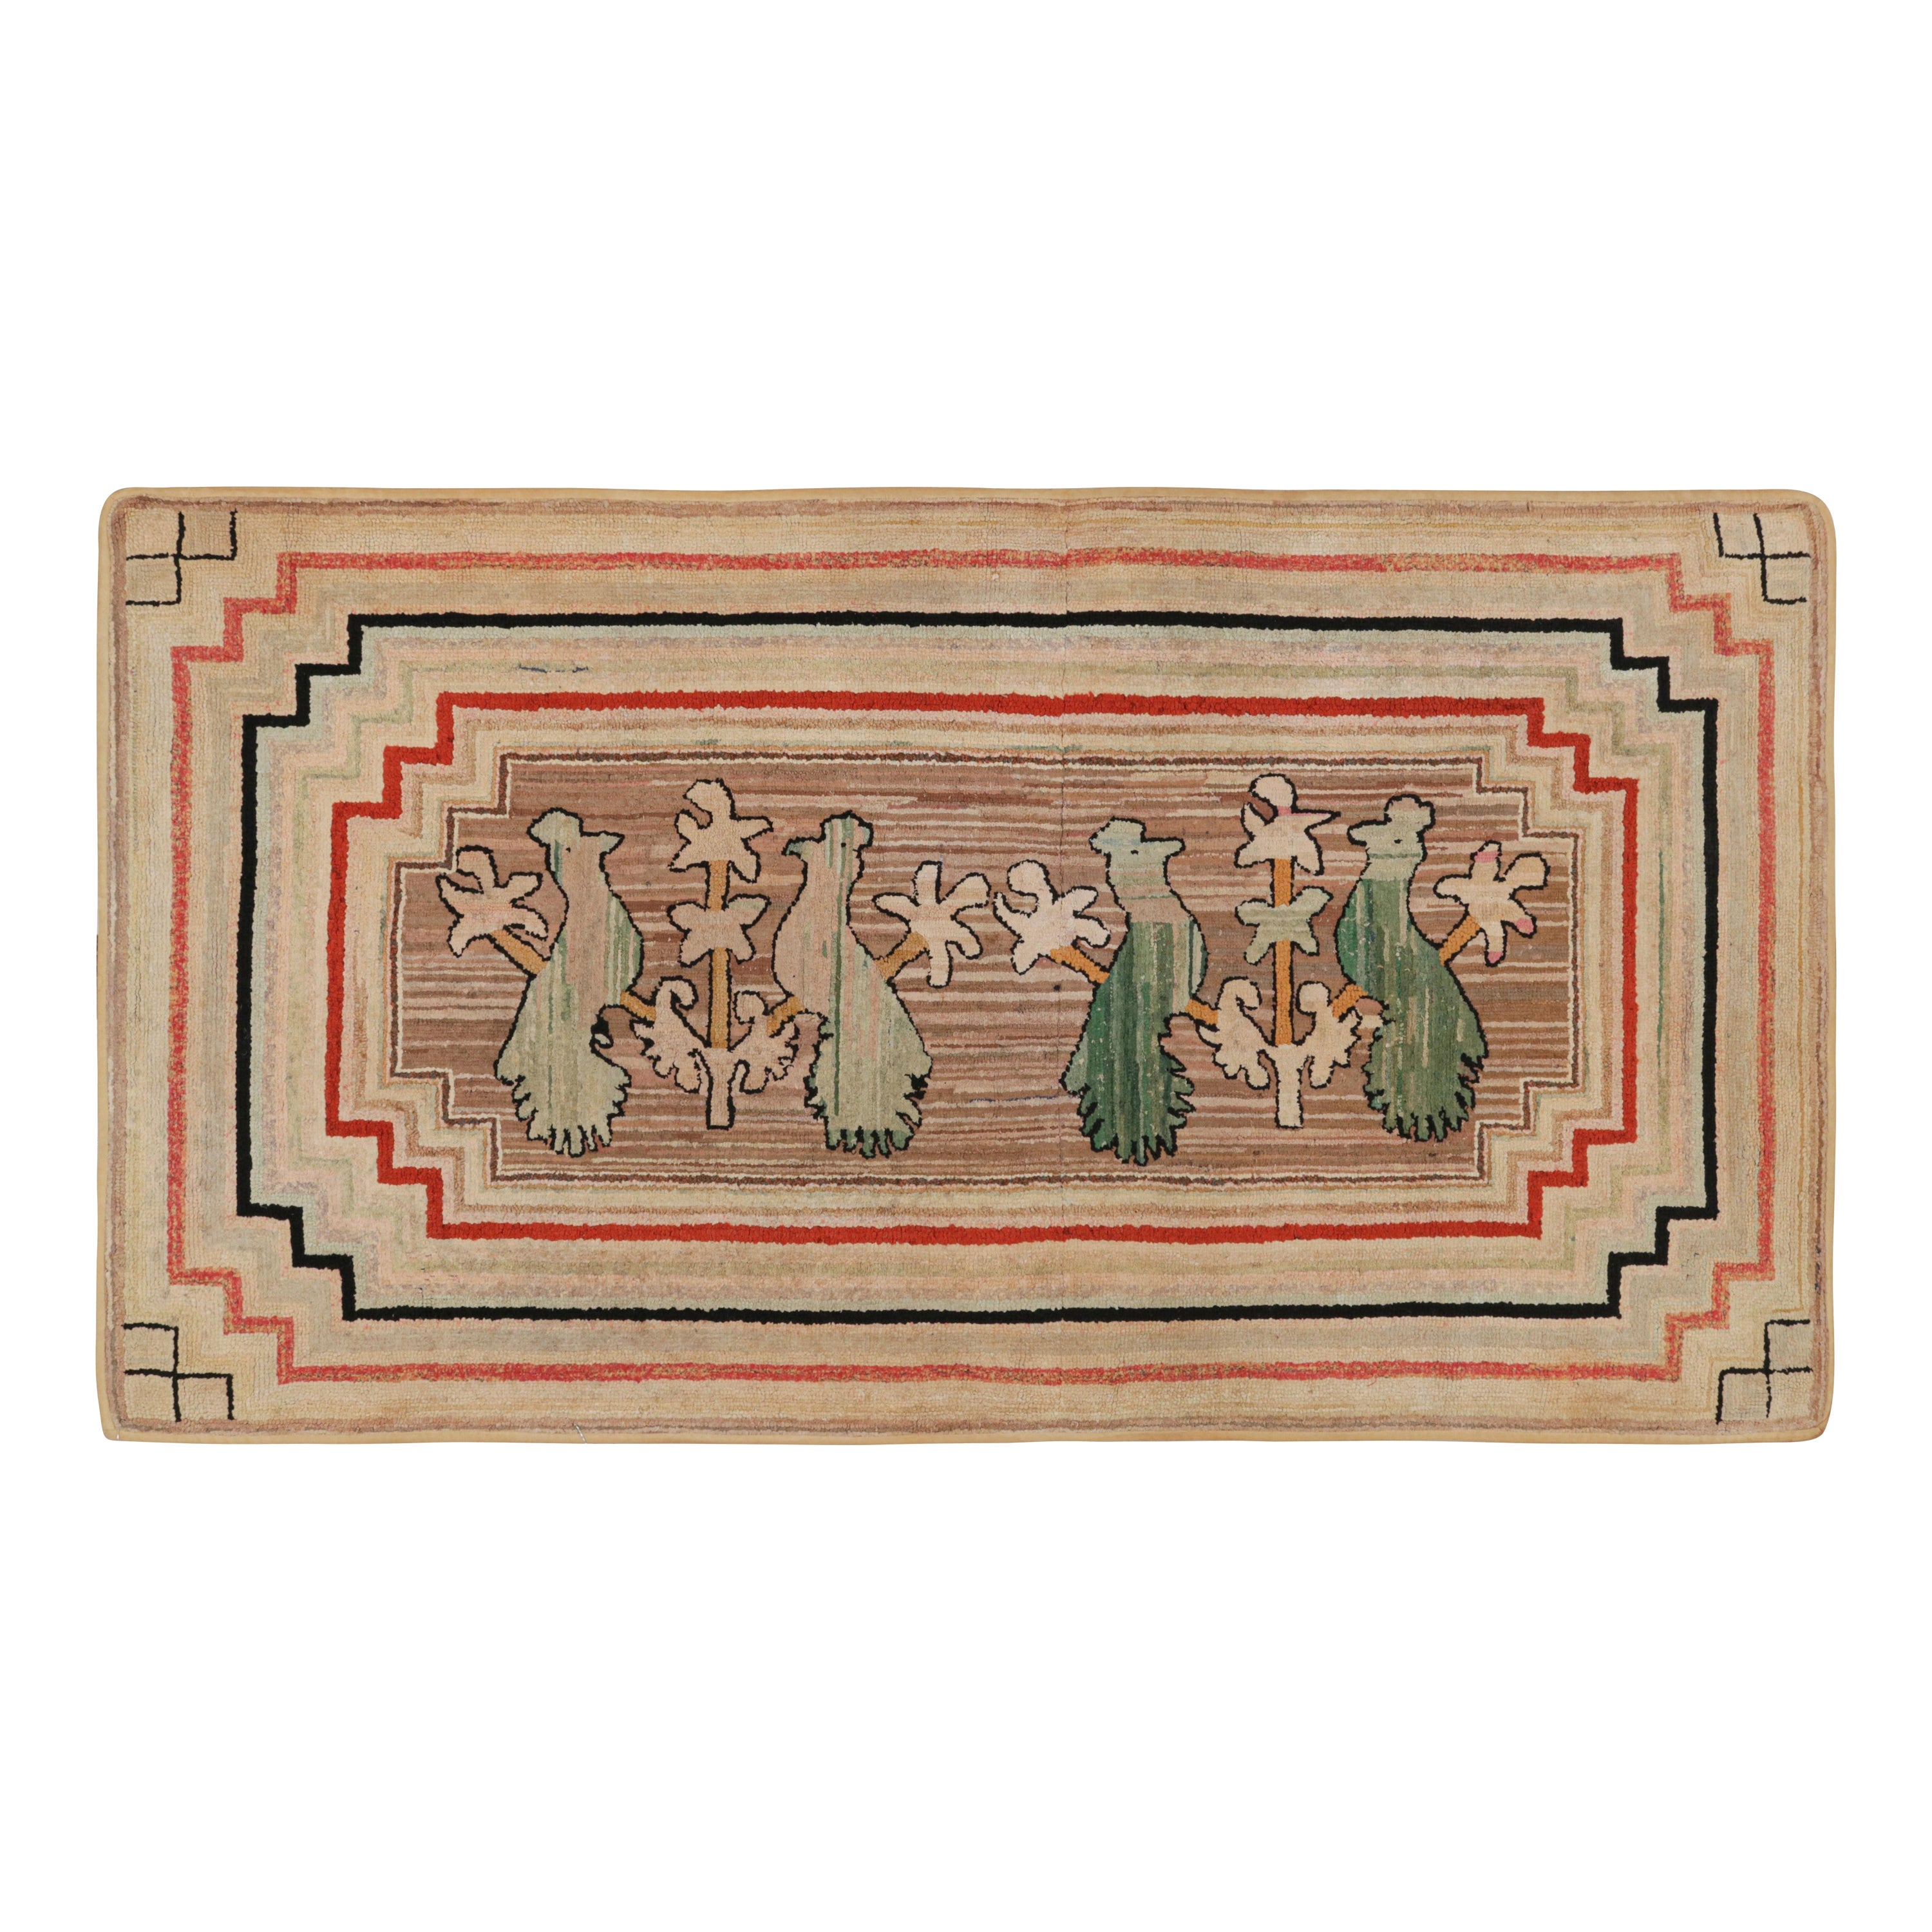 Antique Hooked Runner Rug in Beige with Green Bird Pictorials, from Rug & Kilim For Sale